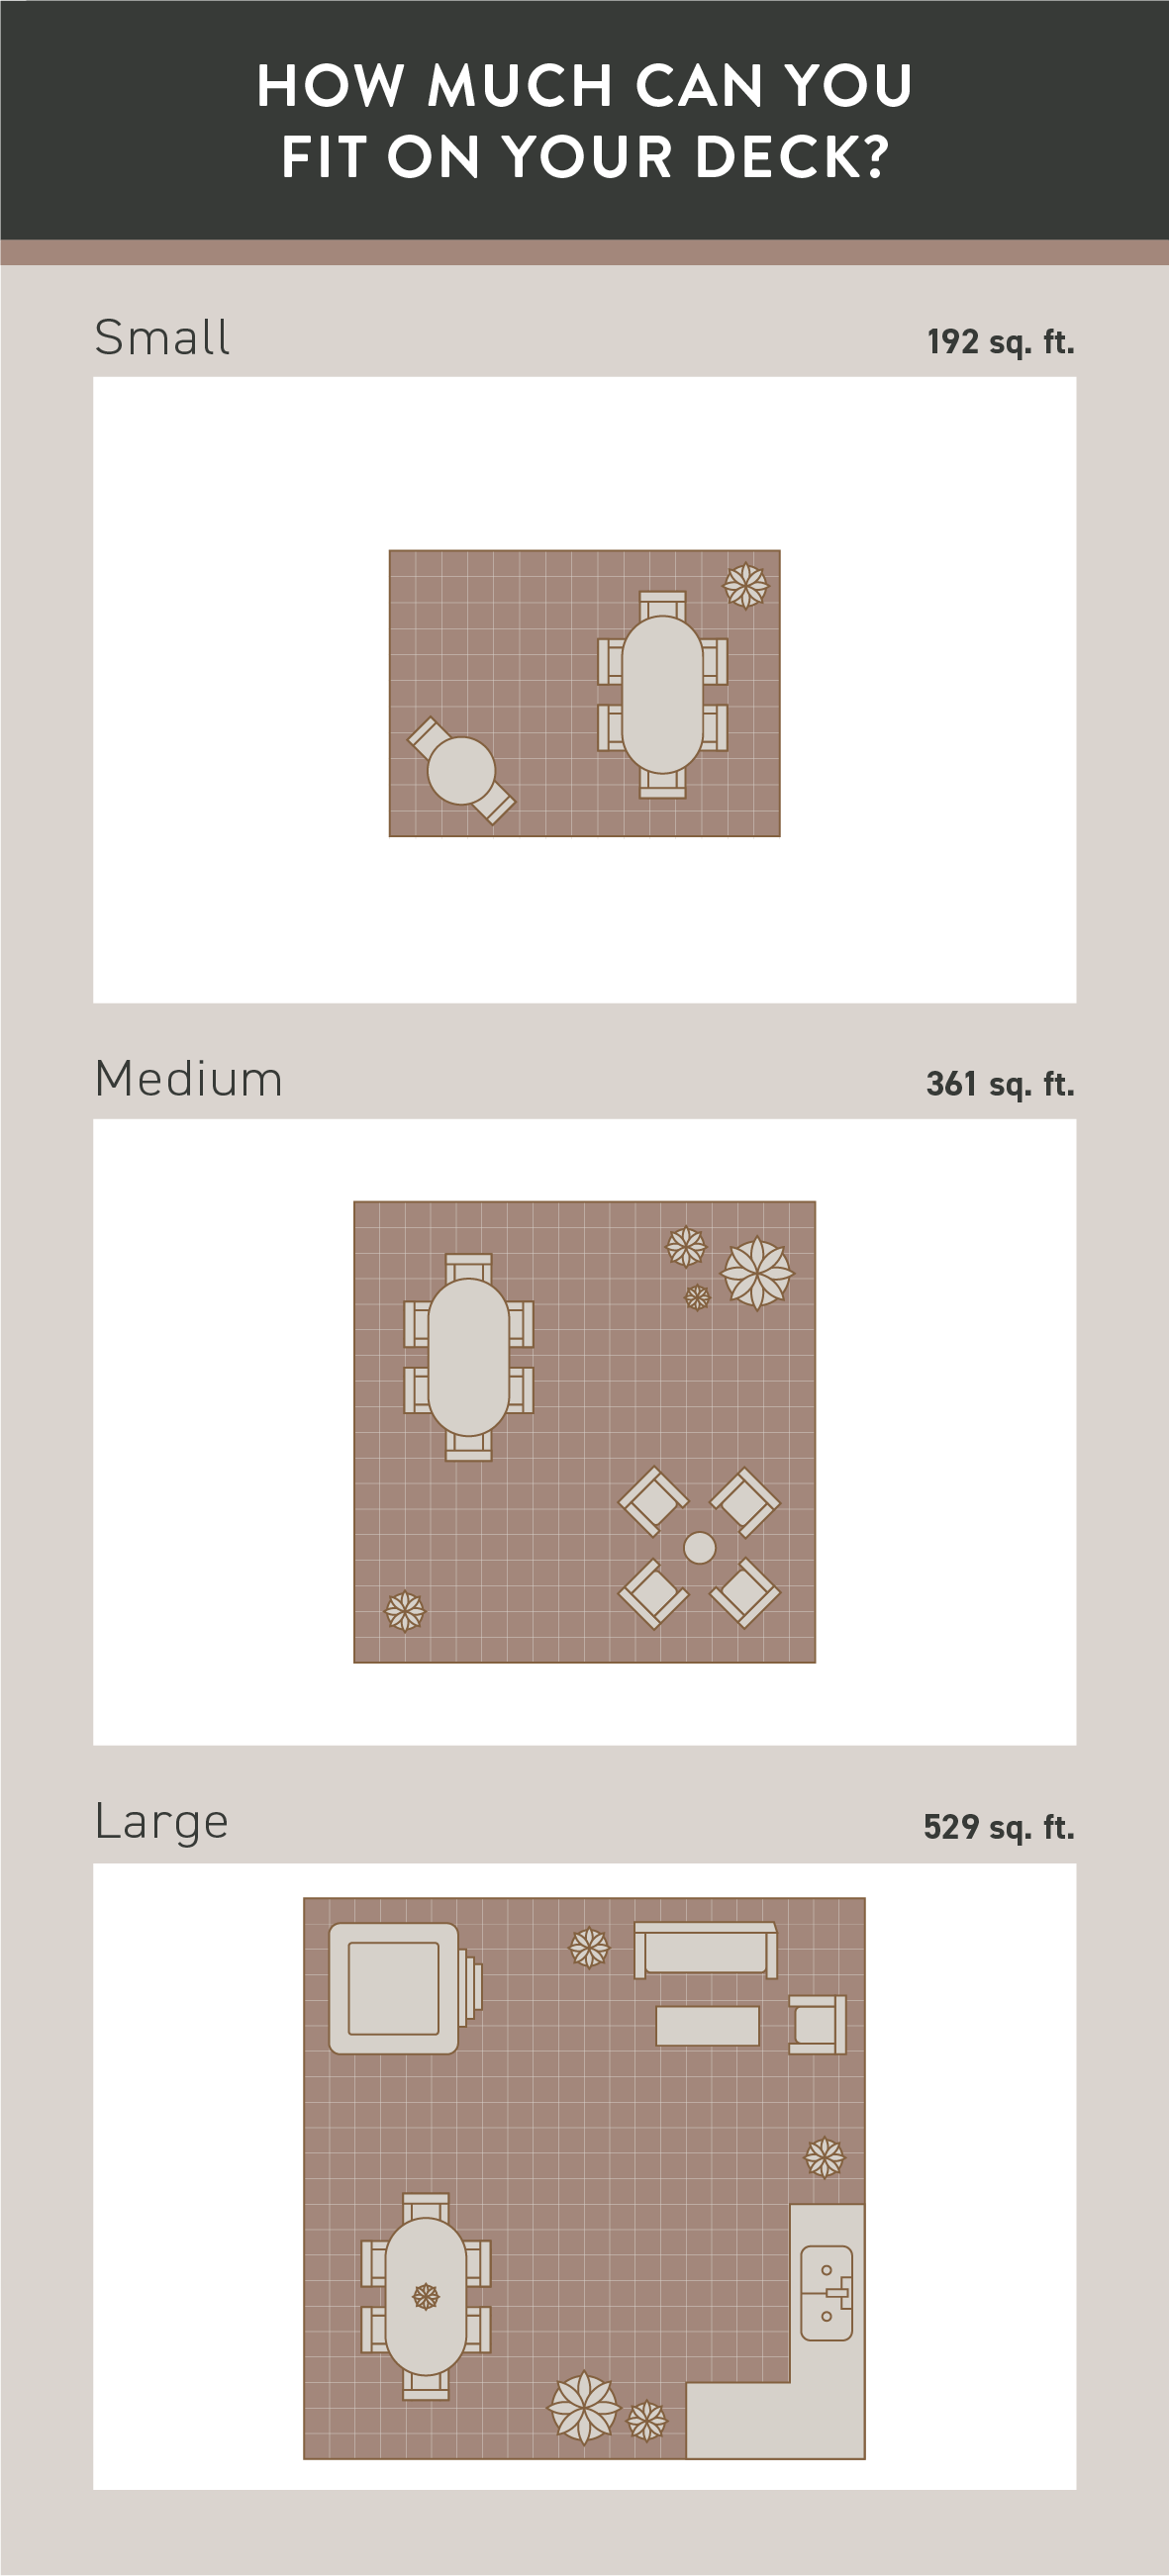 Illustrations comparing how much furniture and accessories you can reasonably fit on 3 different deck sizes.